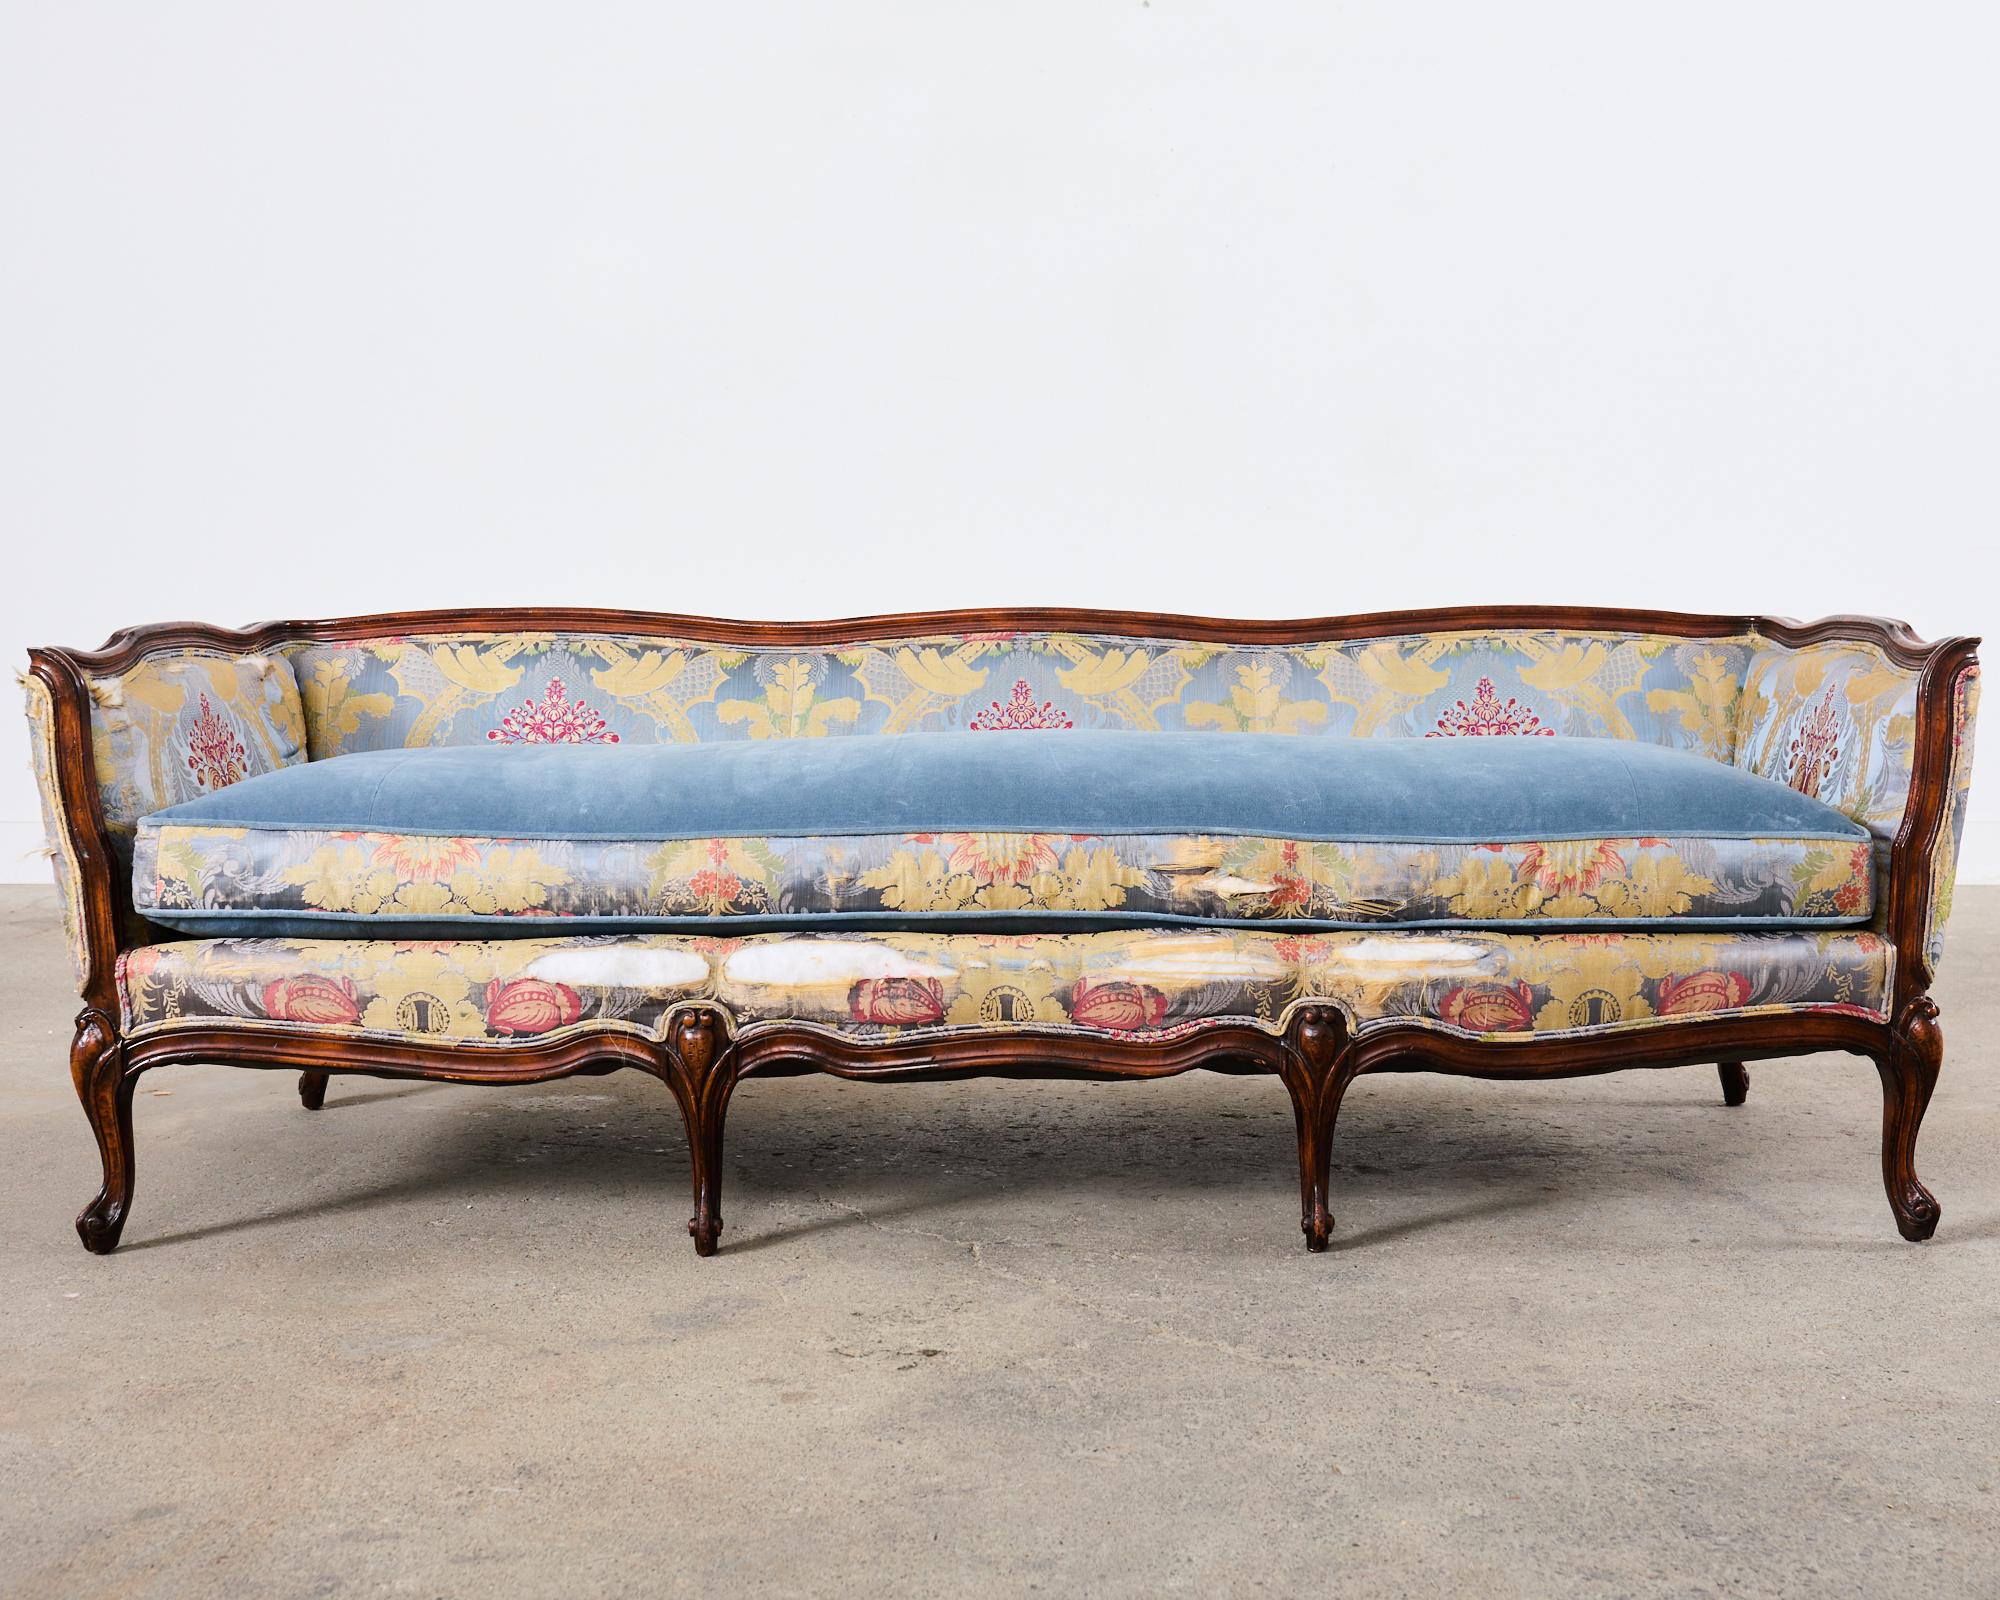 French Provincial Louis XV Style Serpentine Canape Sofa Settee For Sale 4